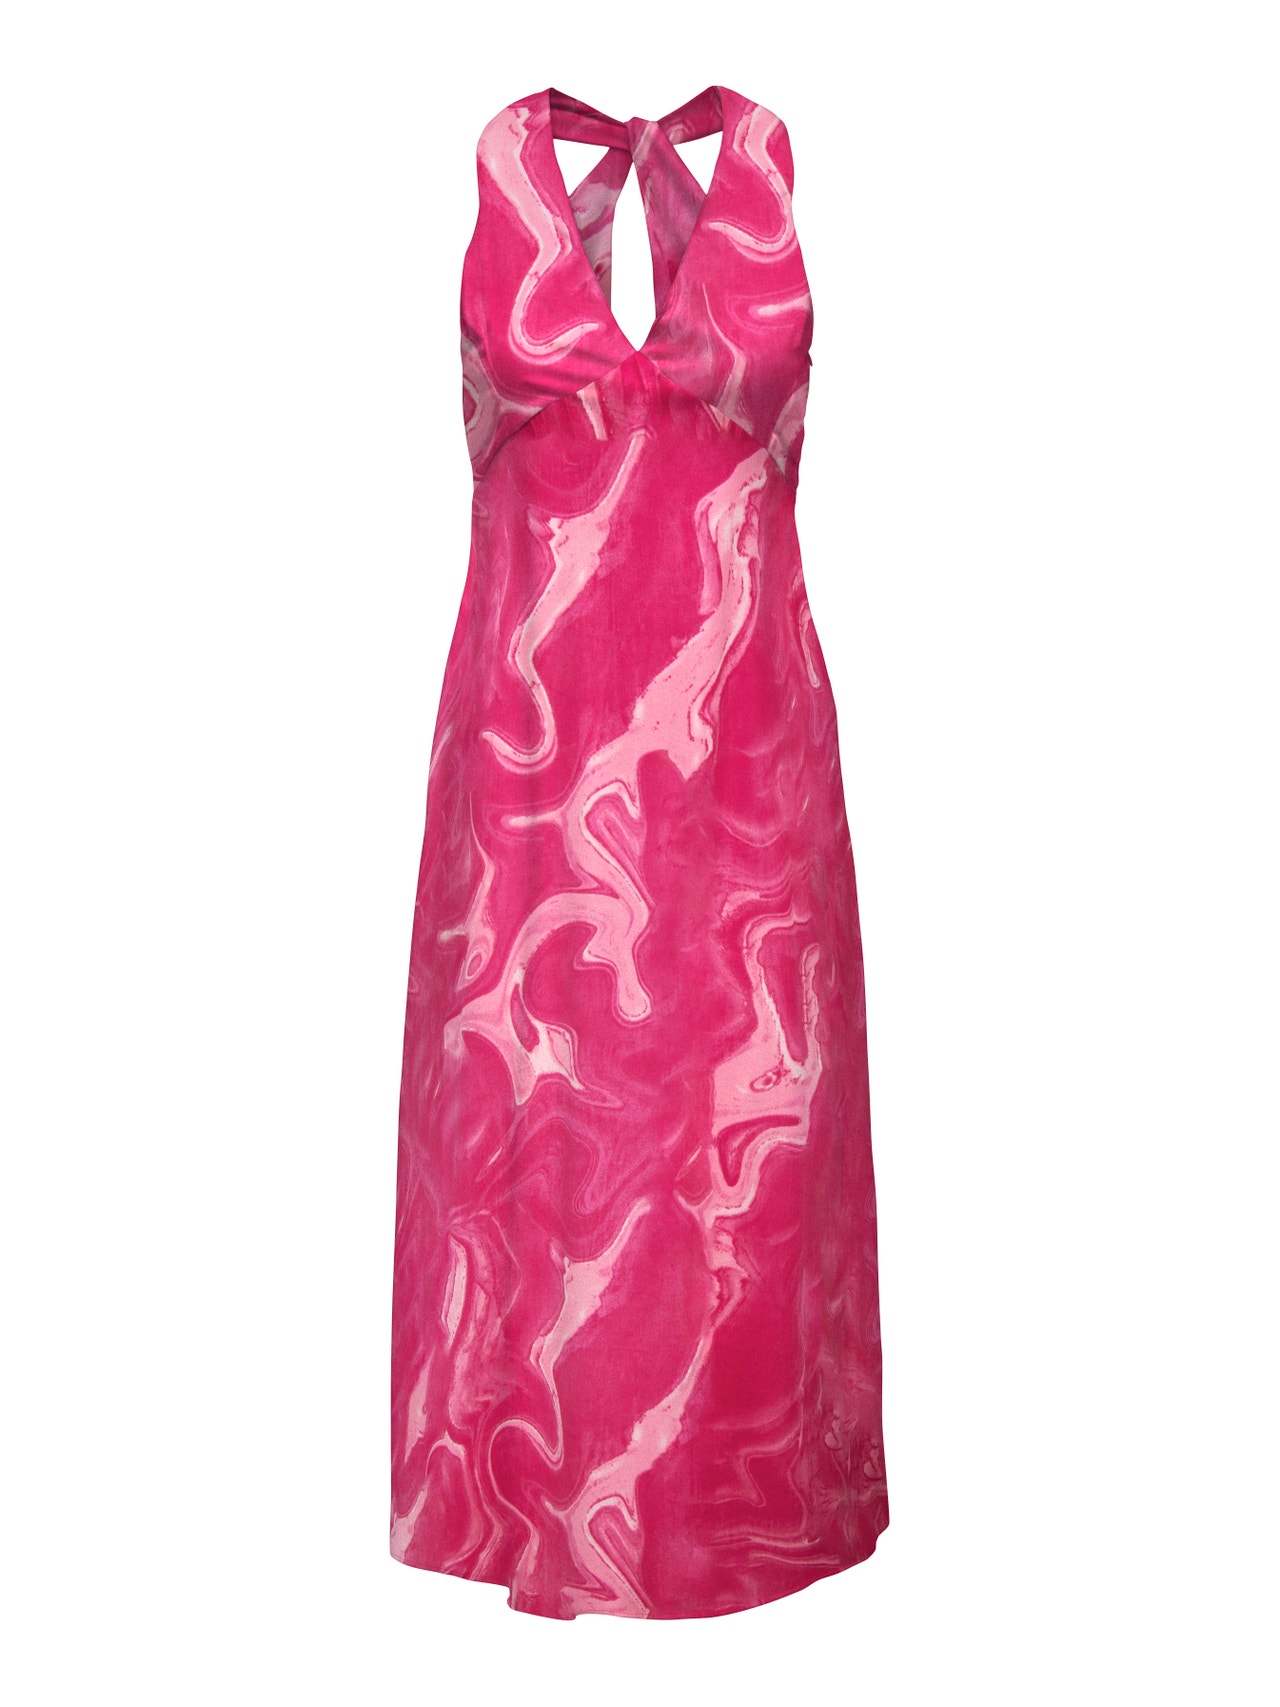 ONLY Maxi dress with v-neck -Raspberry Sorbet - 15318885